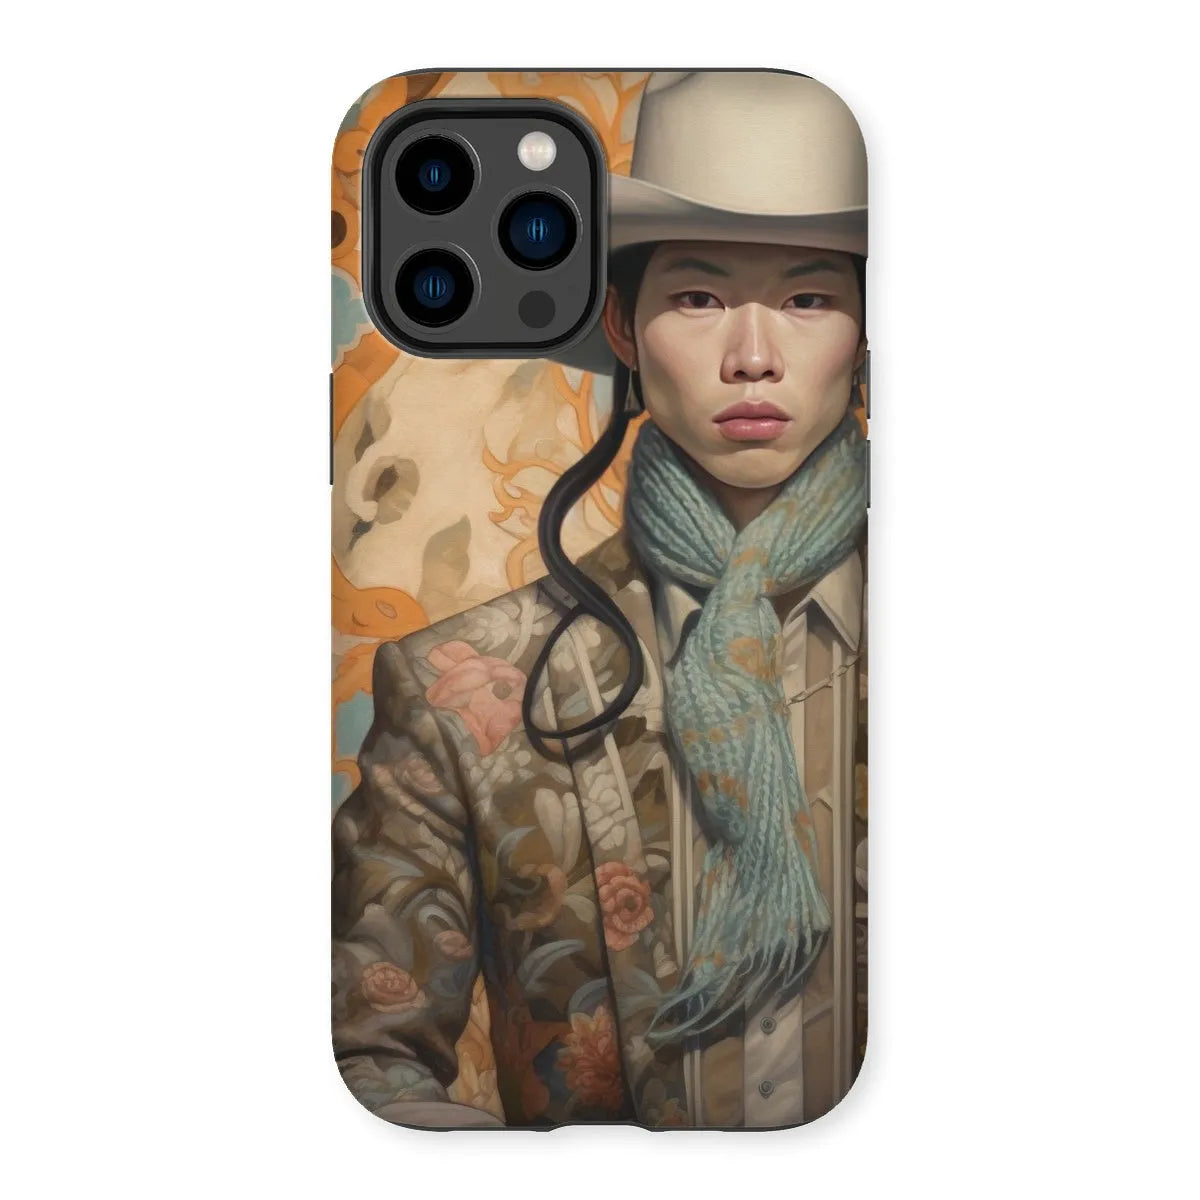 Baihu The Gay Cowboy - Gay Aesthetic Art Phone Case - Iphone 14 Pro Max / Matte - Mobile Phone Cases - Aesthetic Art